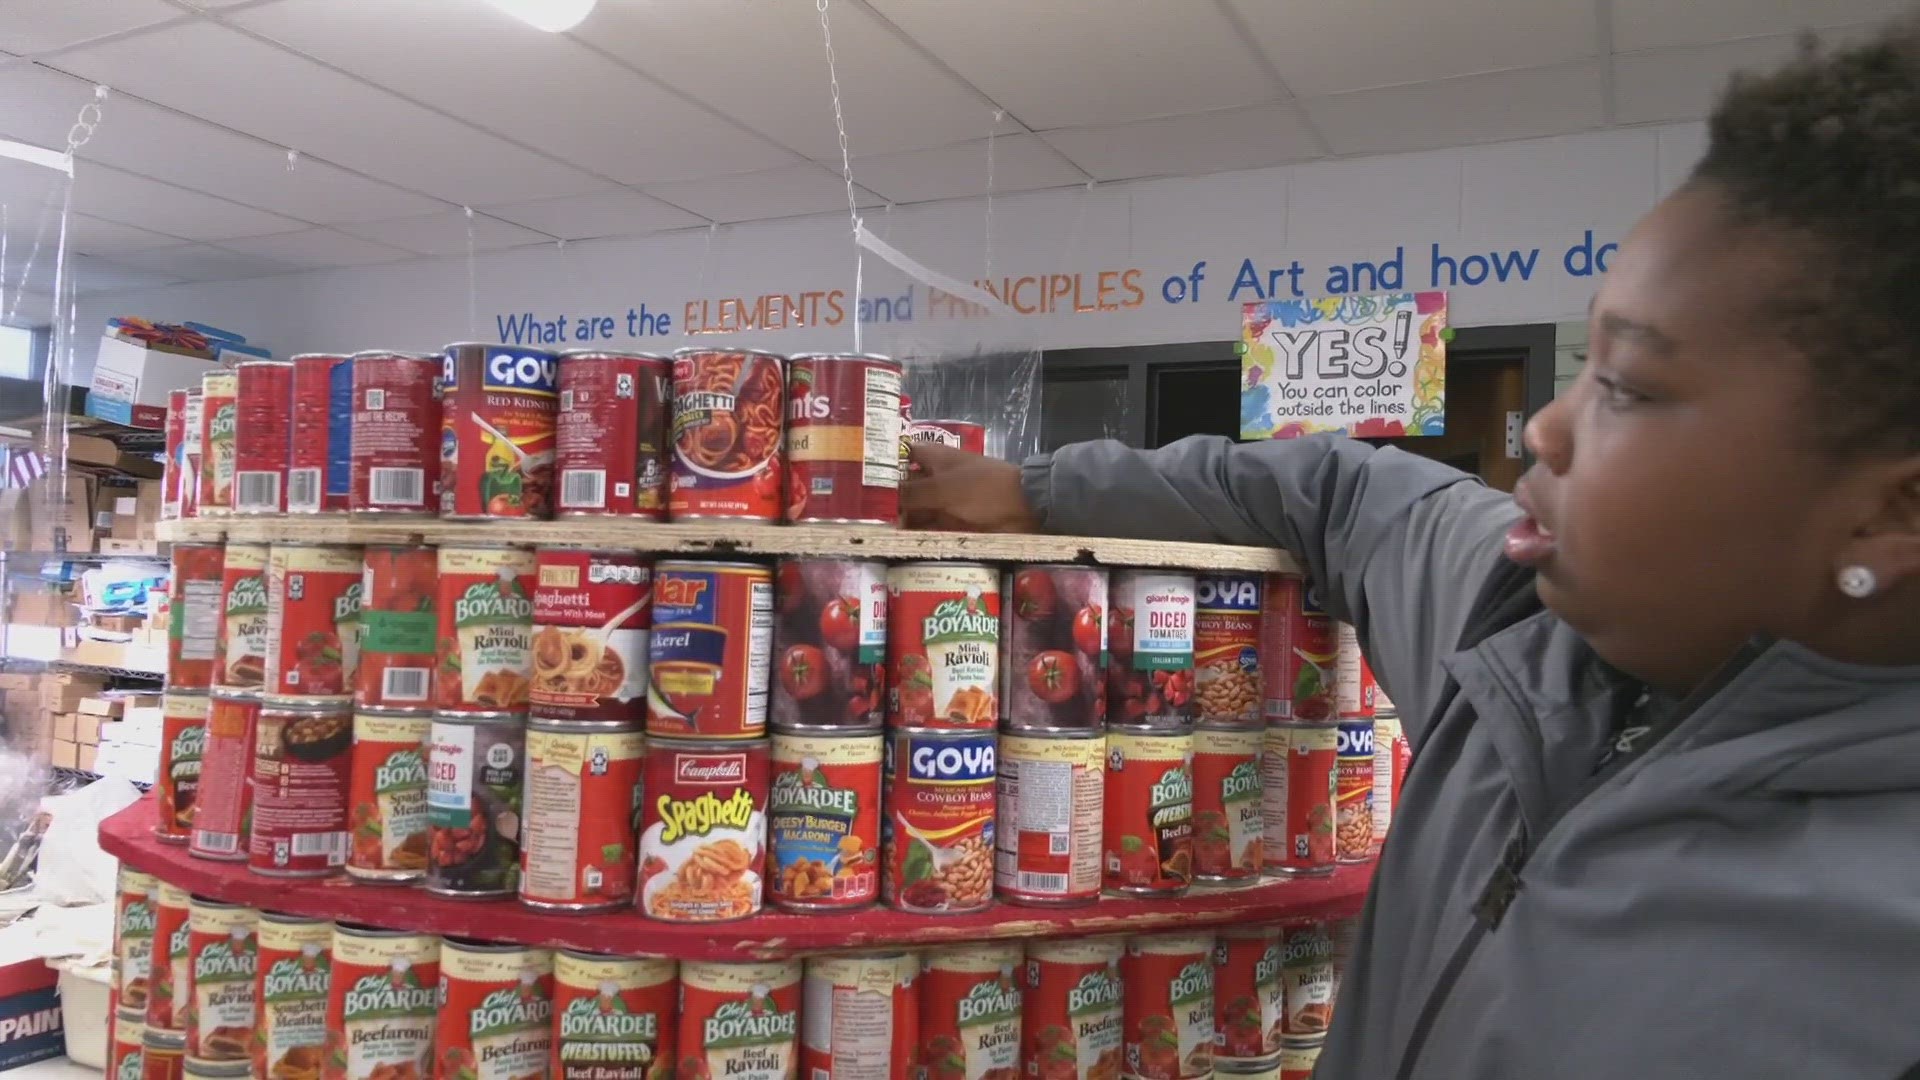 Canton middle school students made canned goods sculptures to learn about math and giving back.